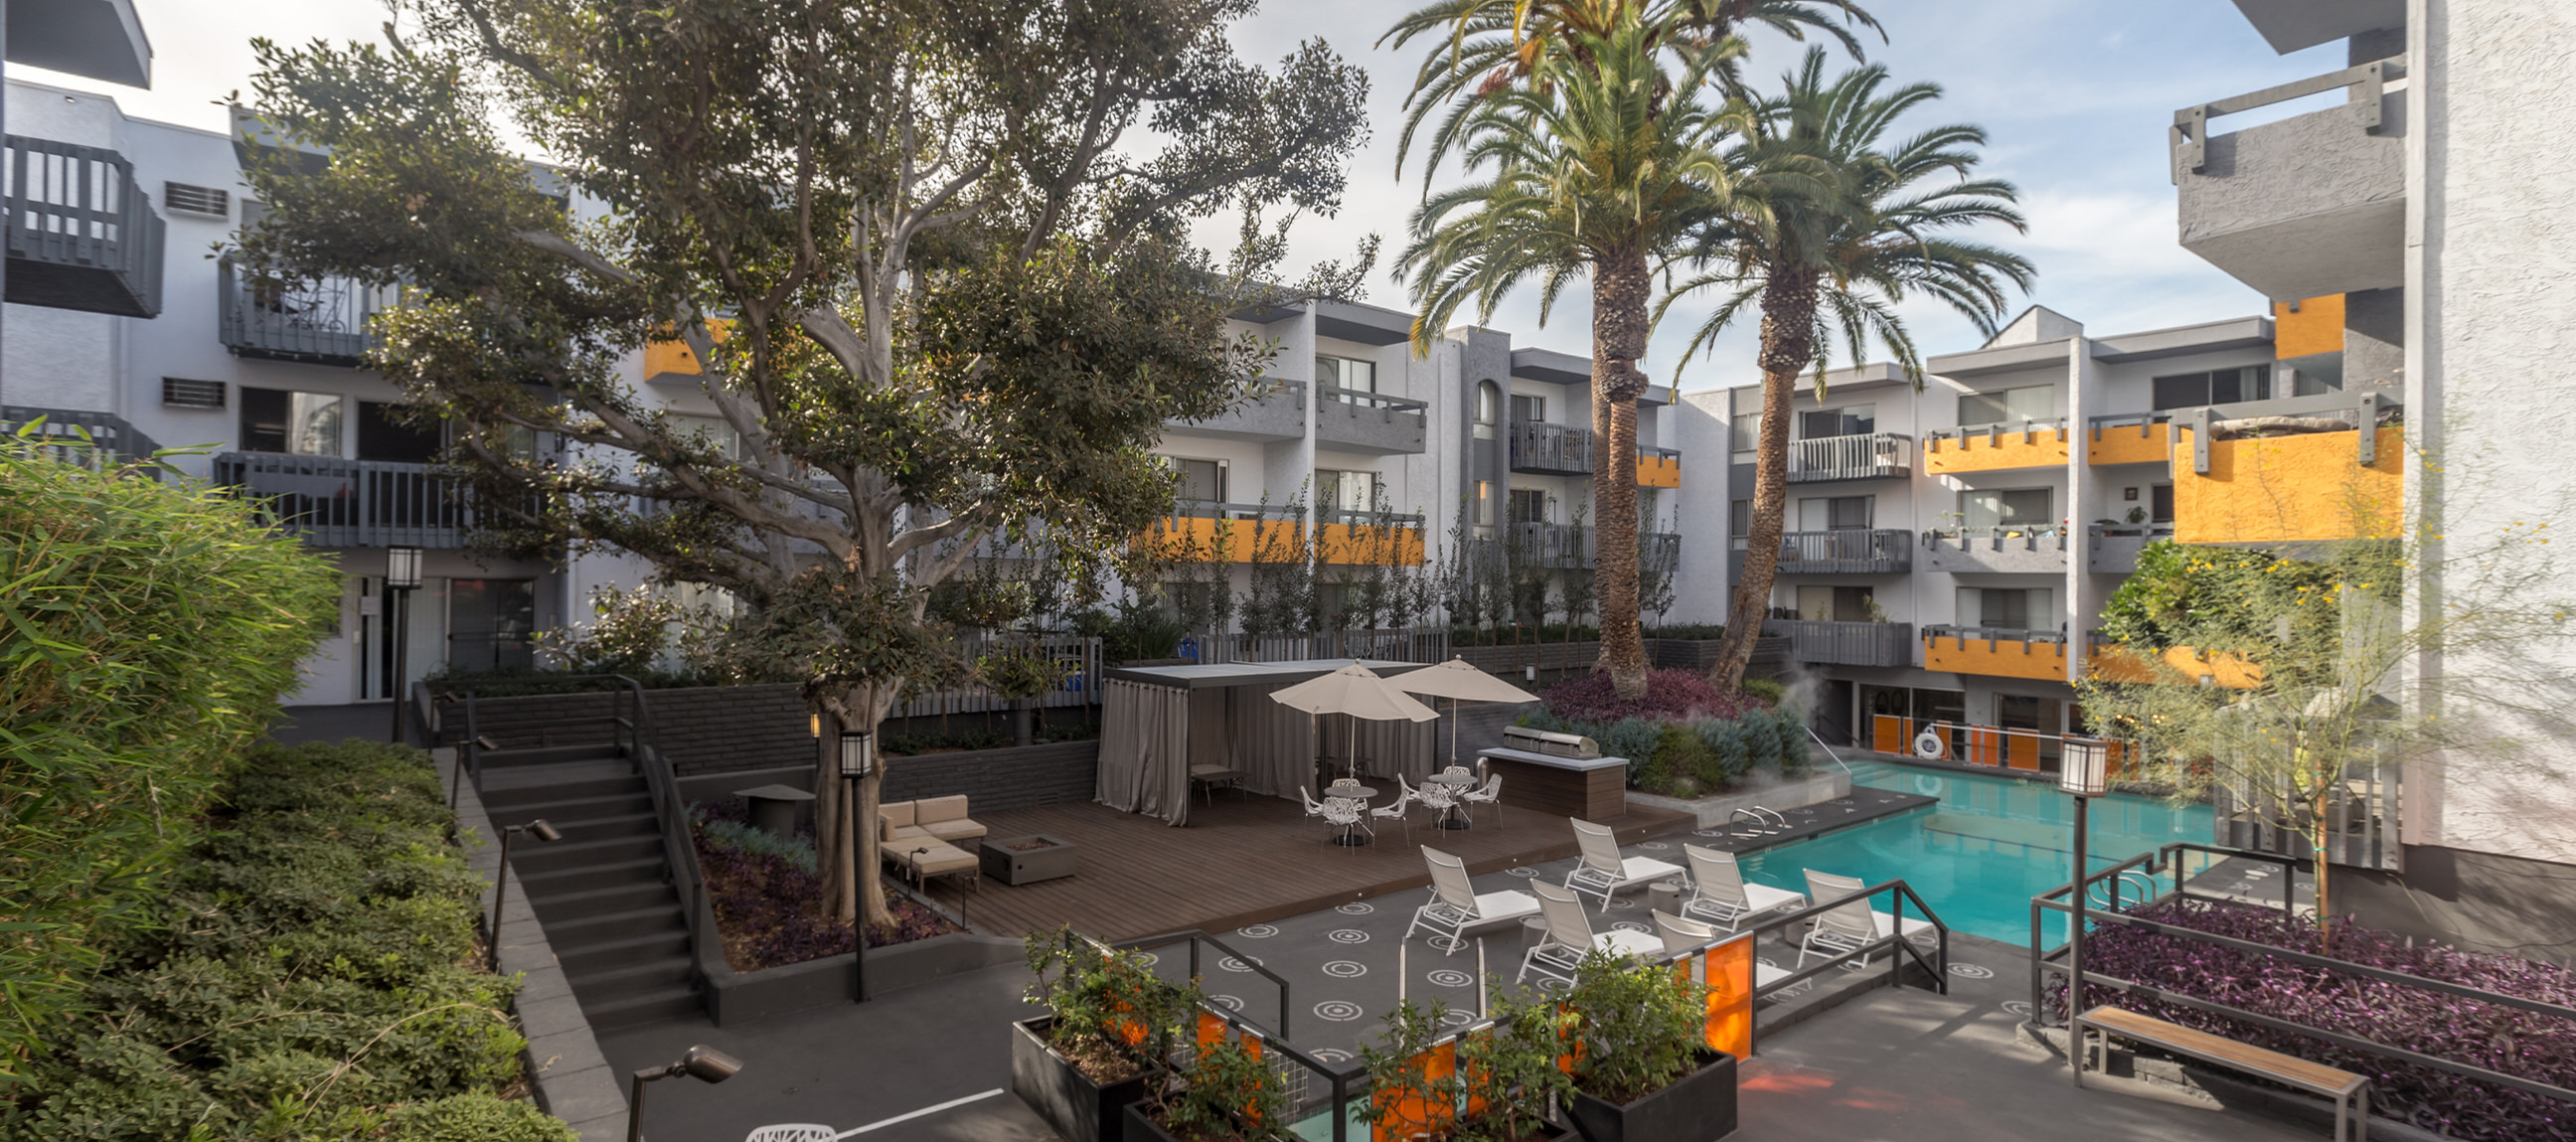 Photo of pool deck area at Aspen Apartments in Los Angeles, CA